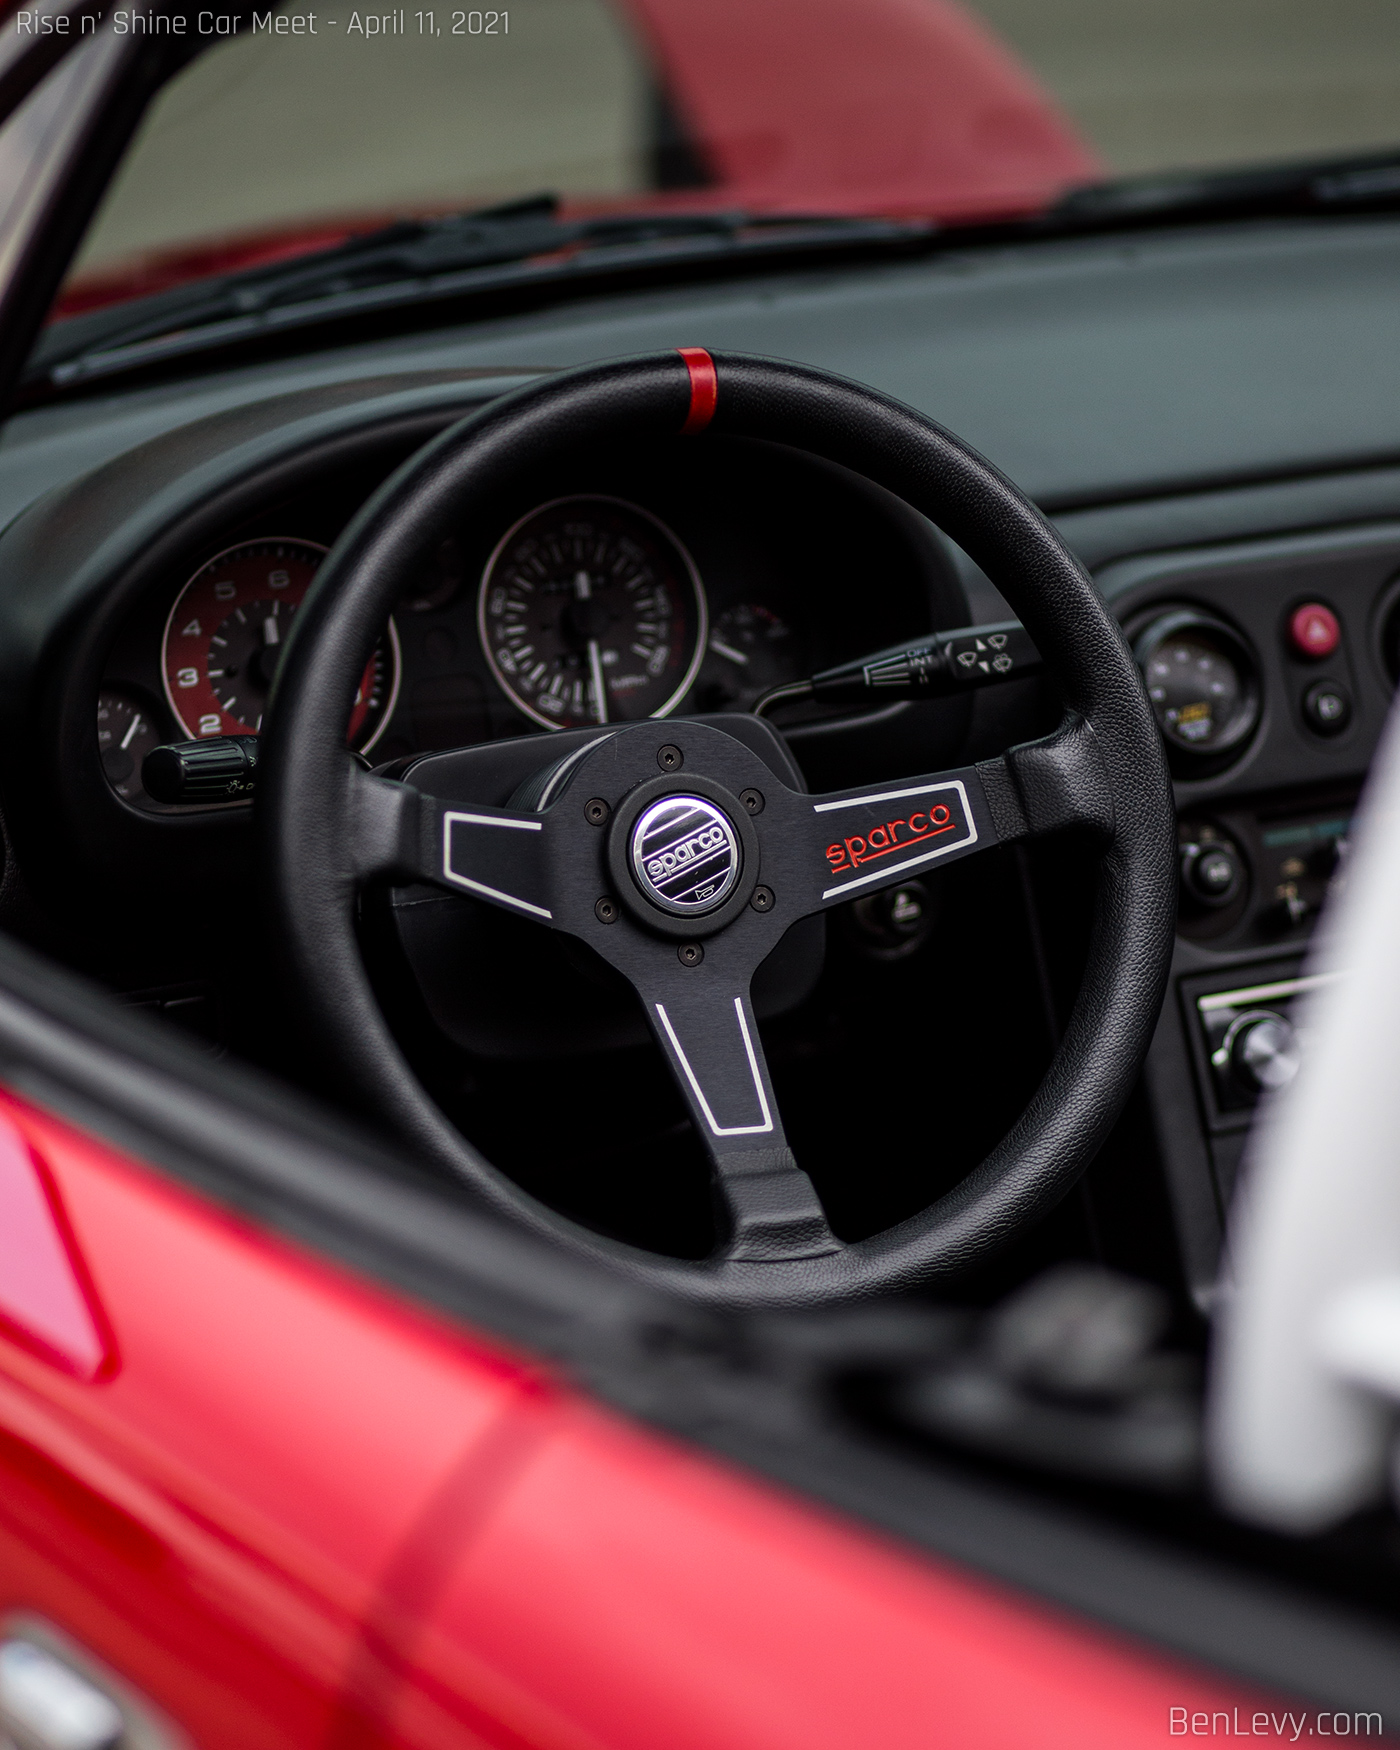 Leather-wrapped Sparco steering wheel in Miata